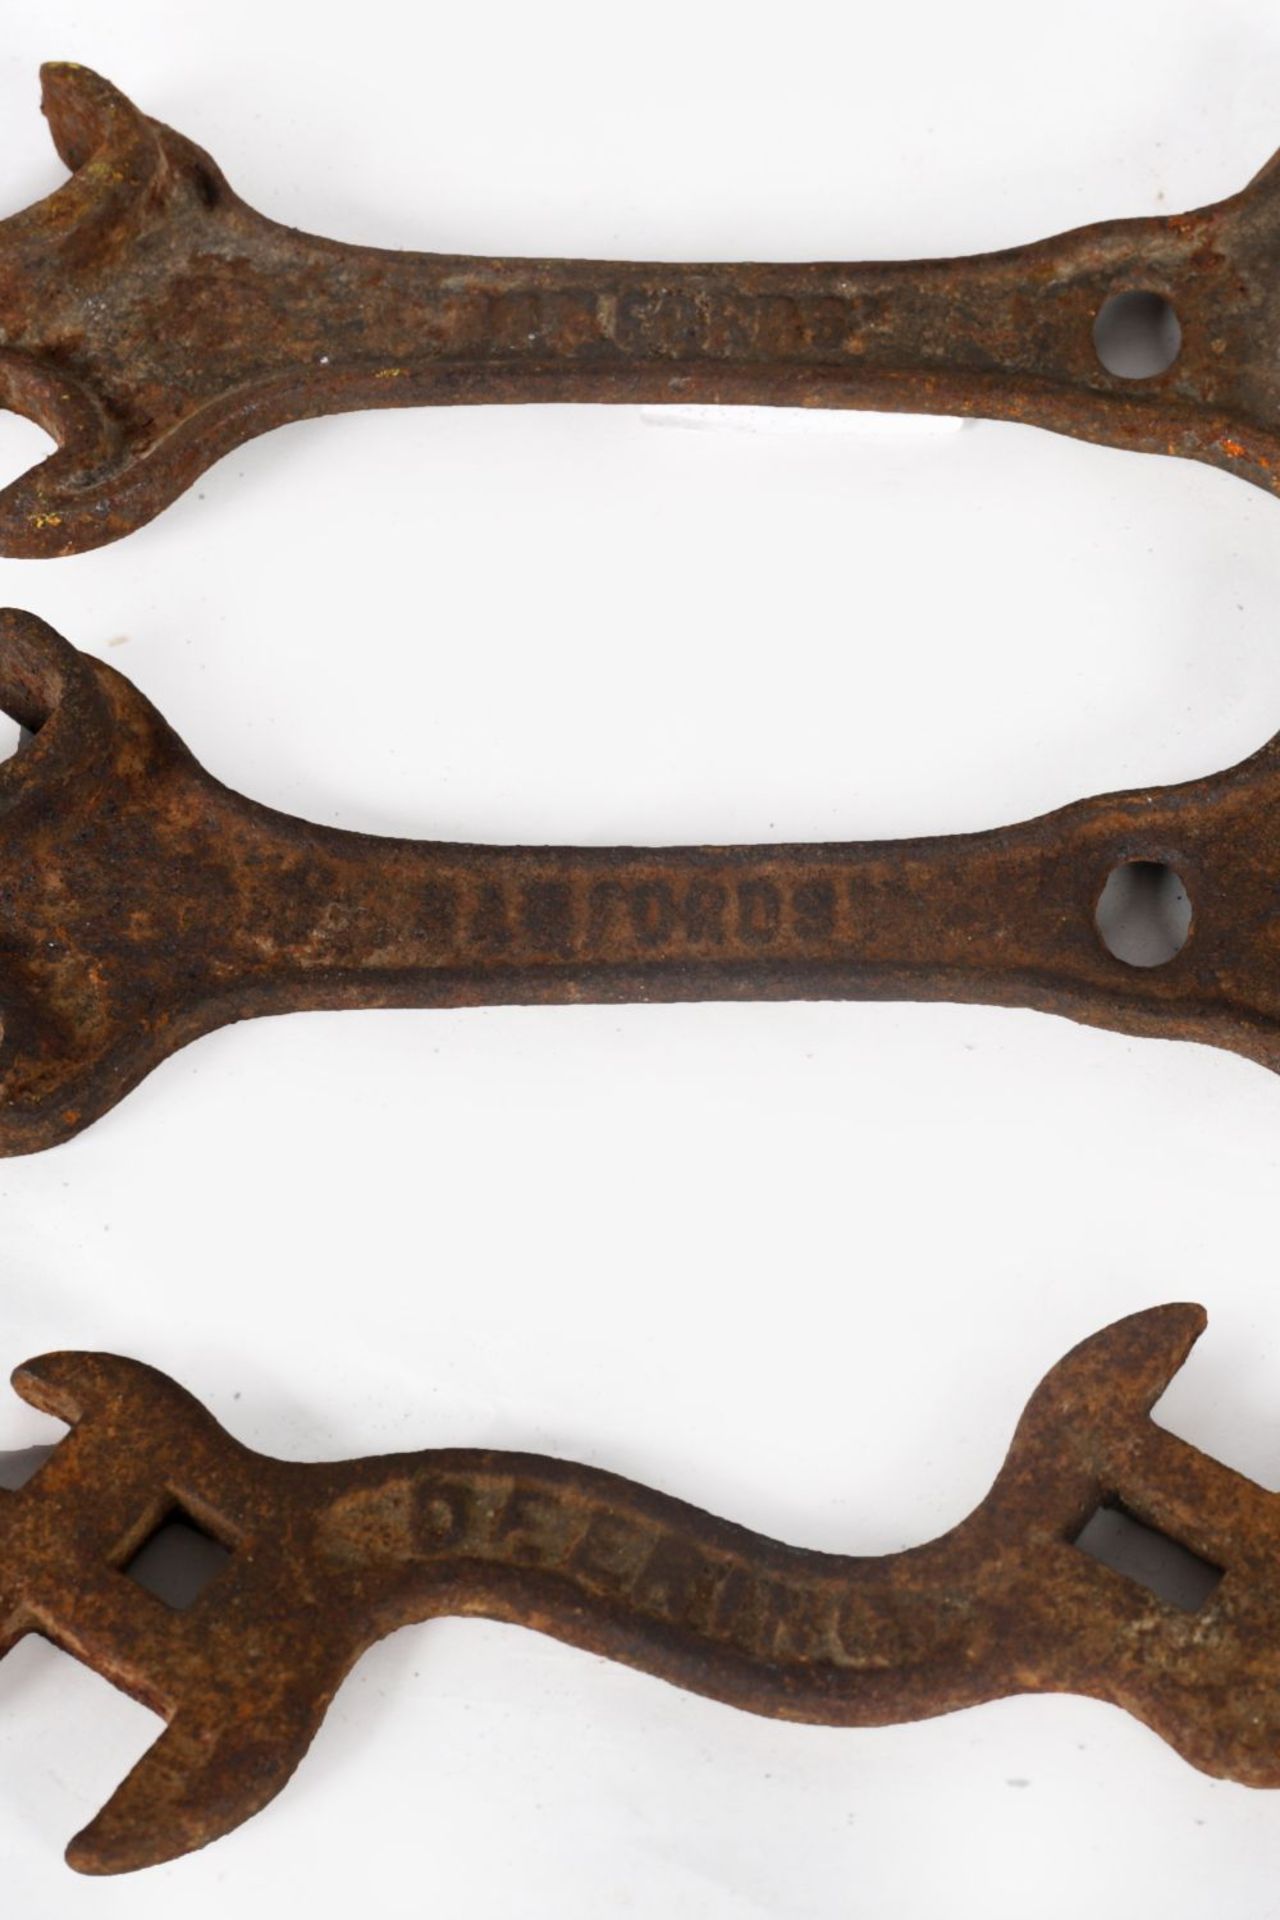 3 EARLY CAST IRON WRENCHES - Image 2 of 4